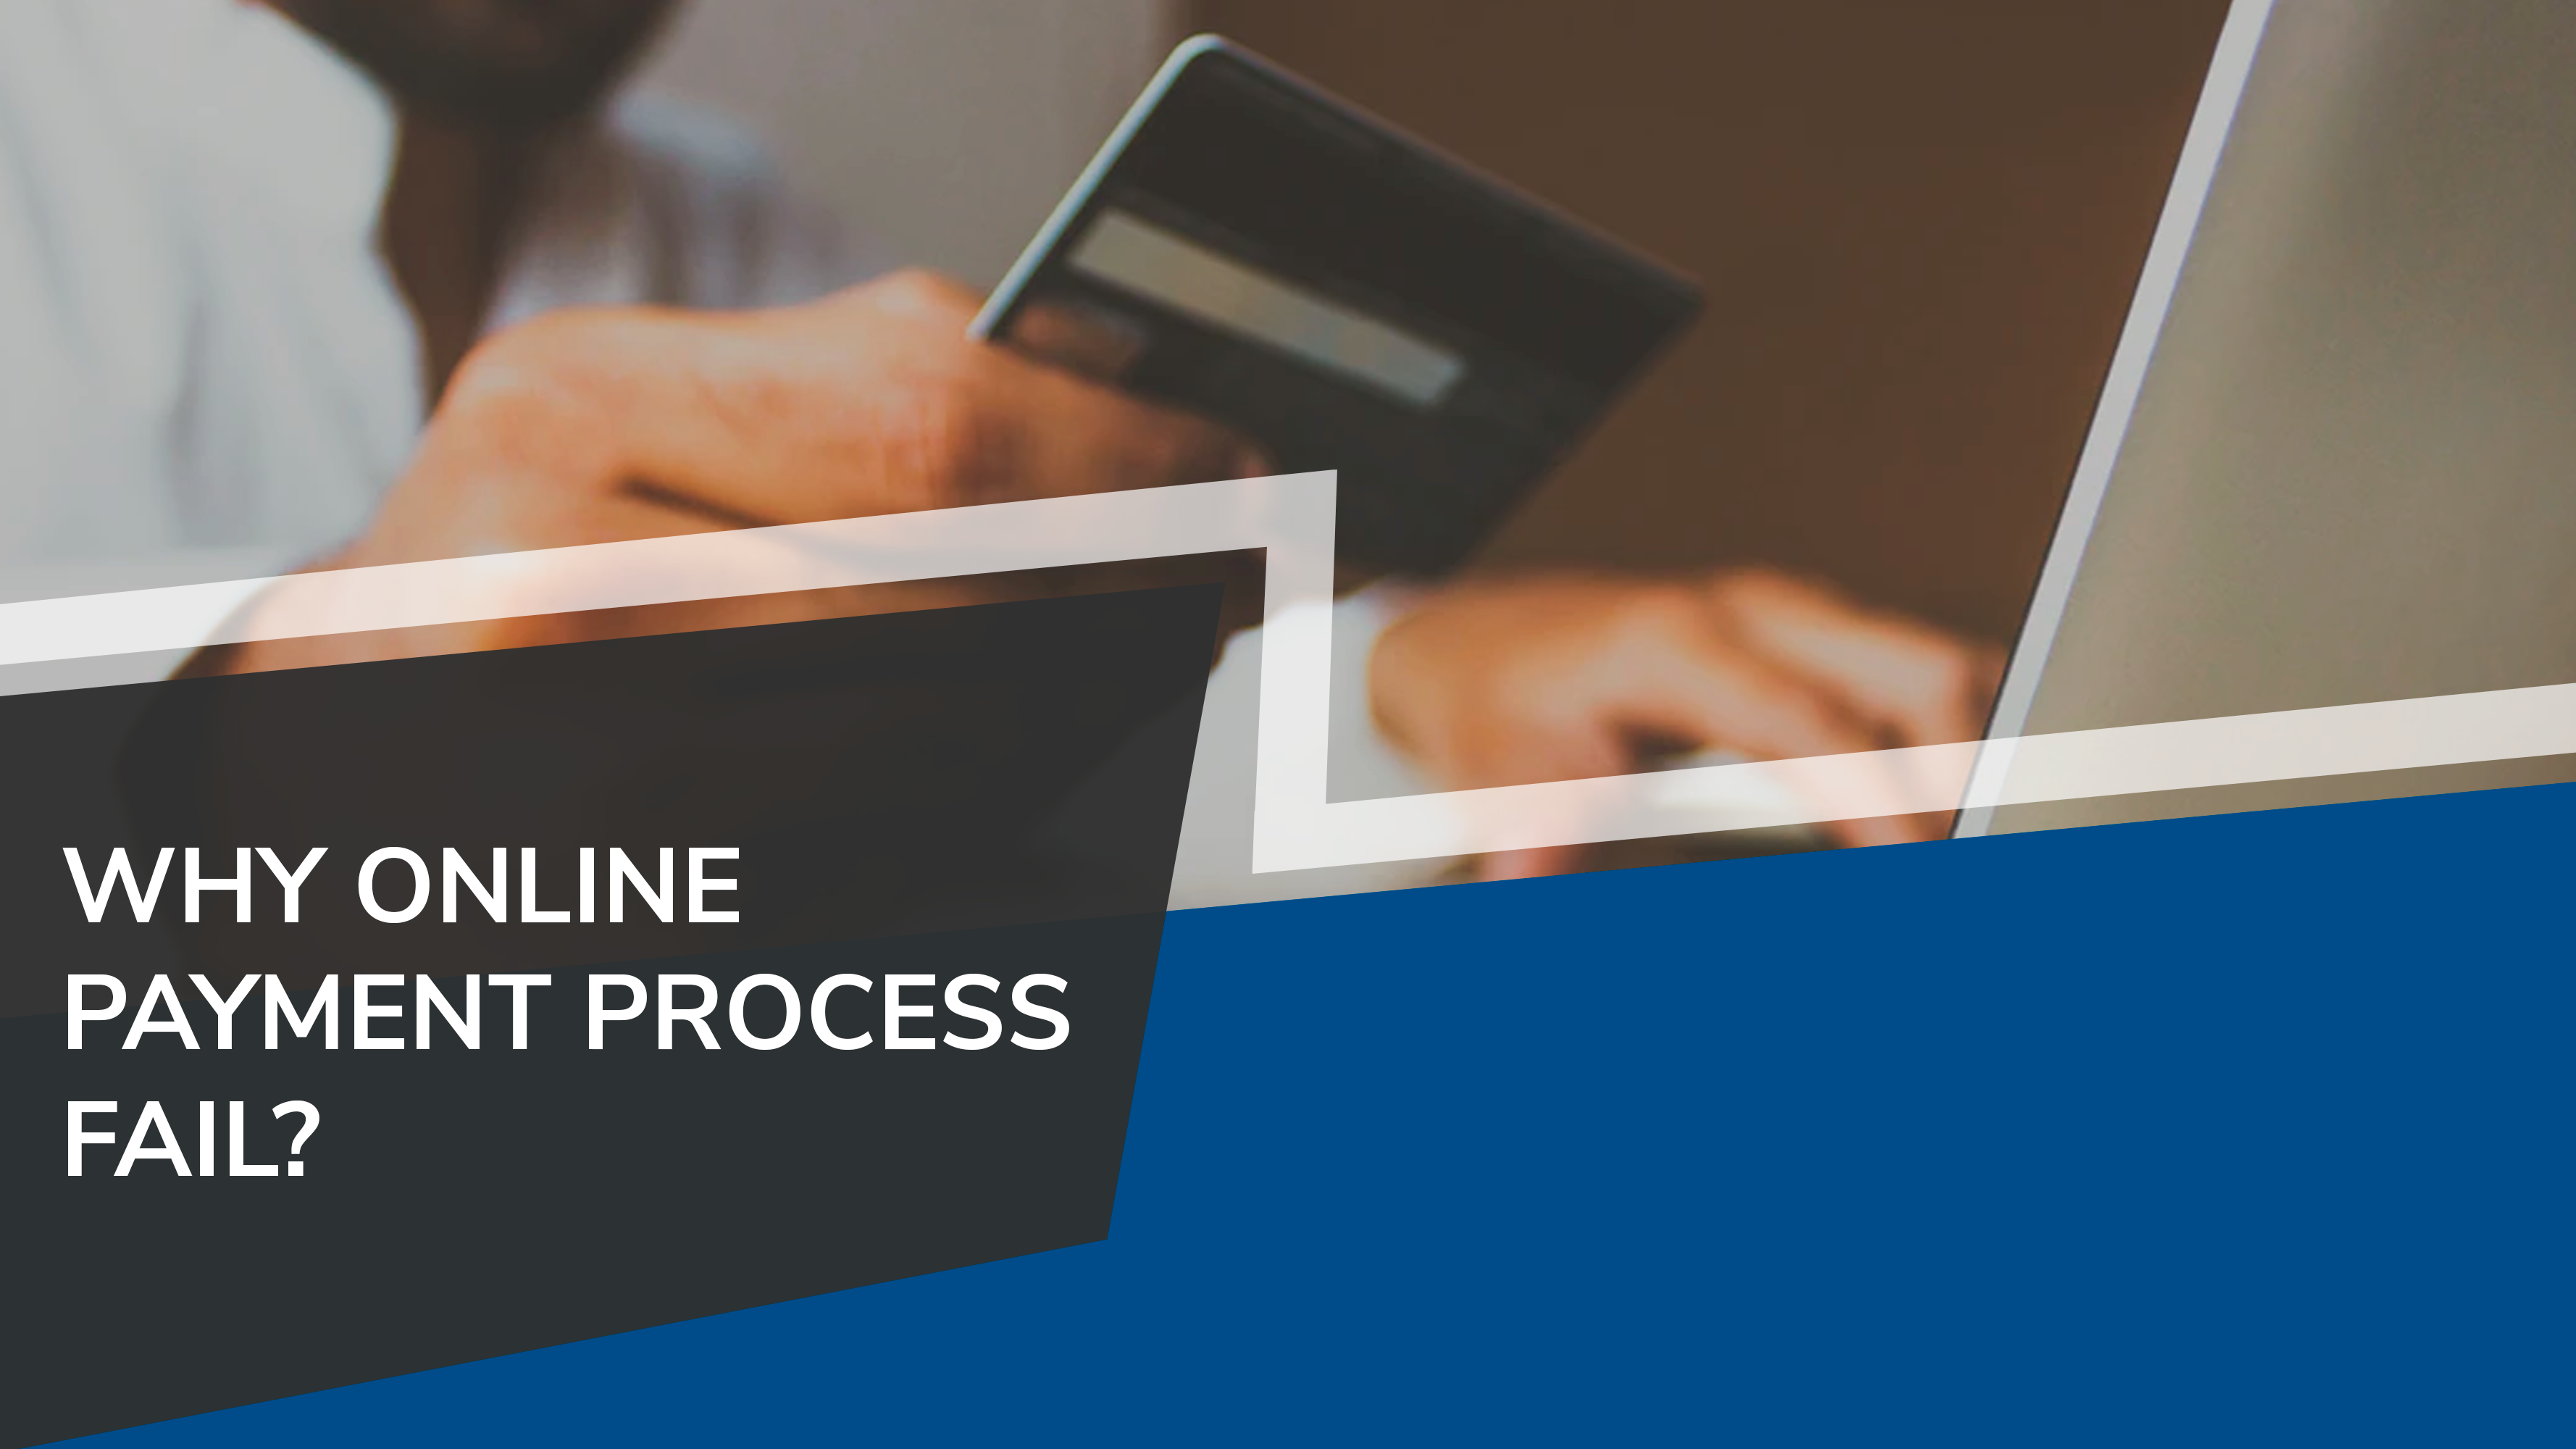 Reasons why online payment transaction fails during process